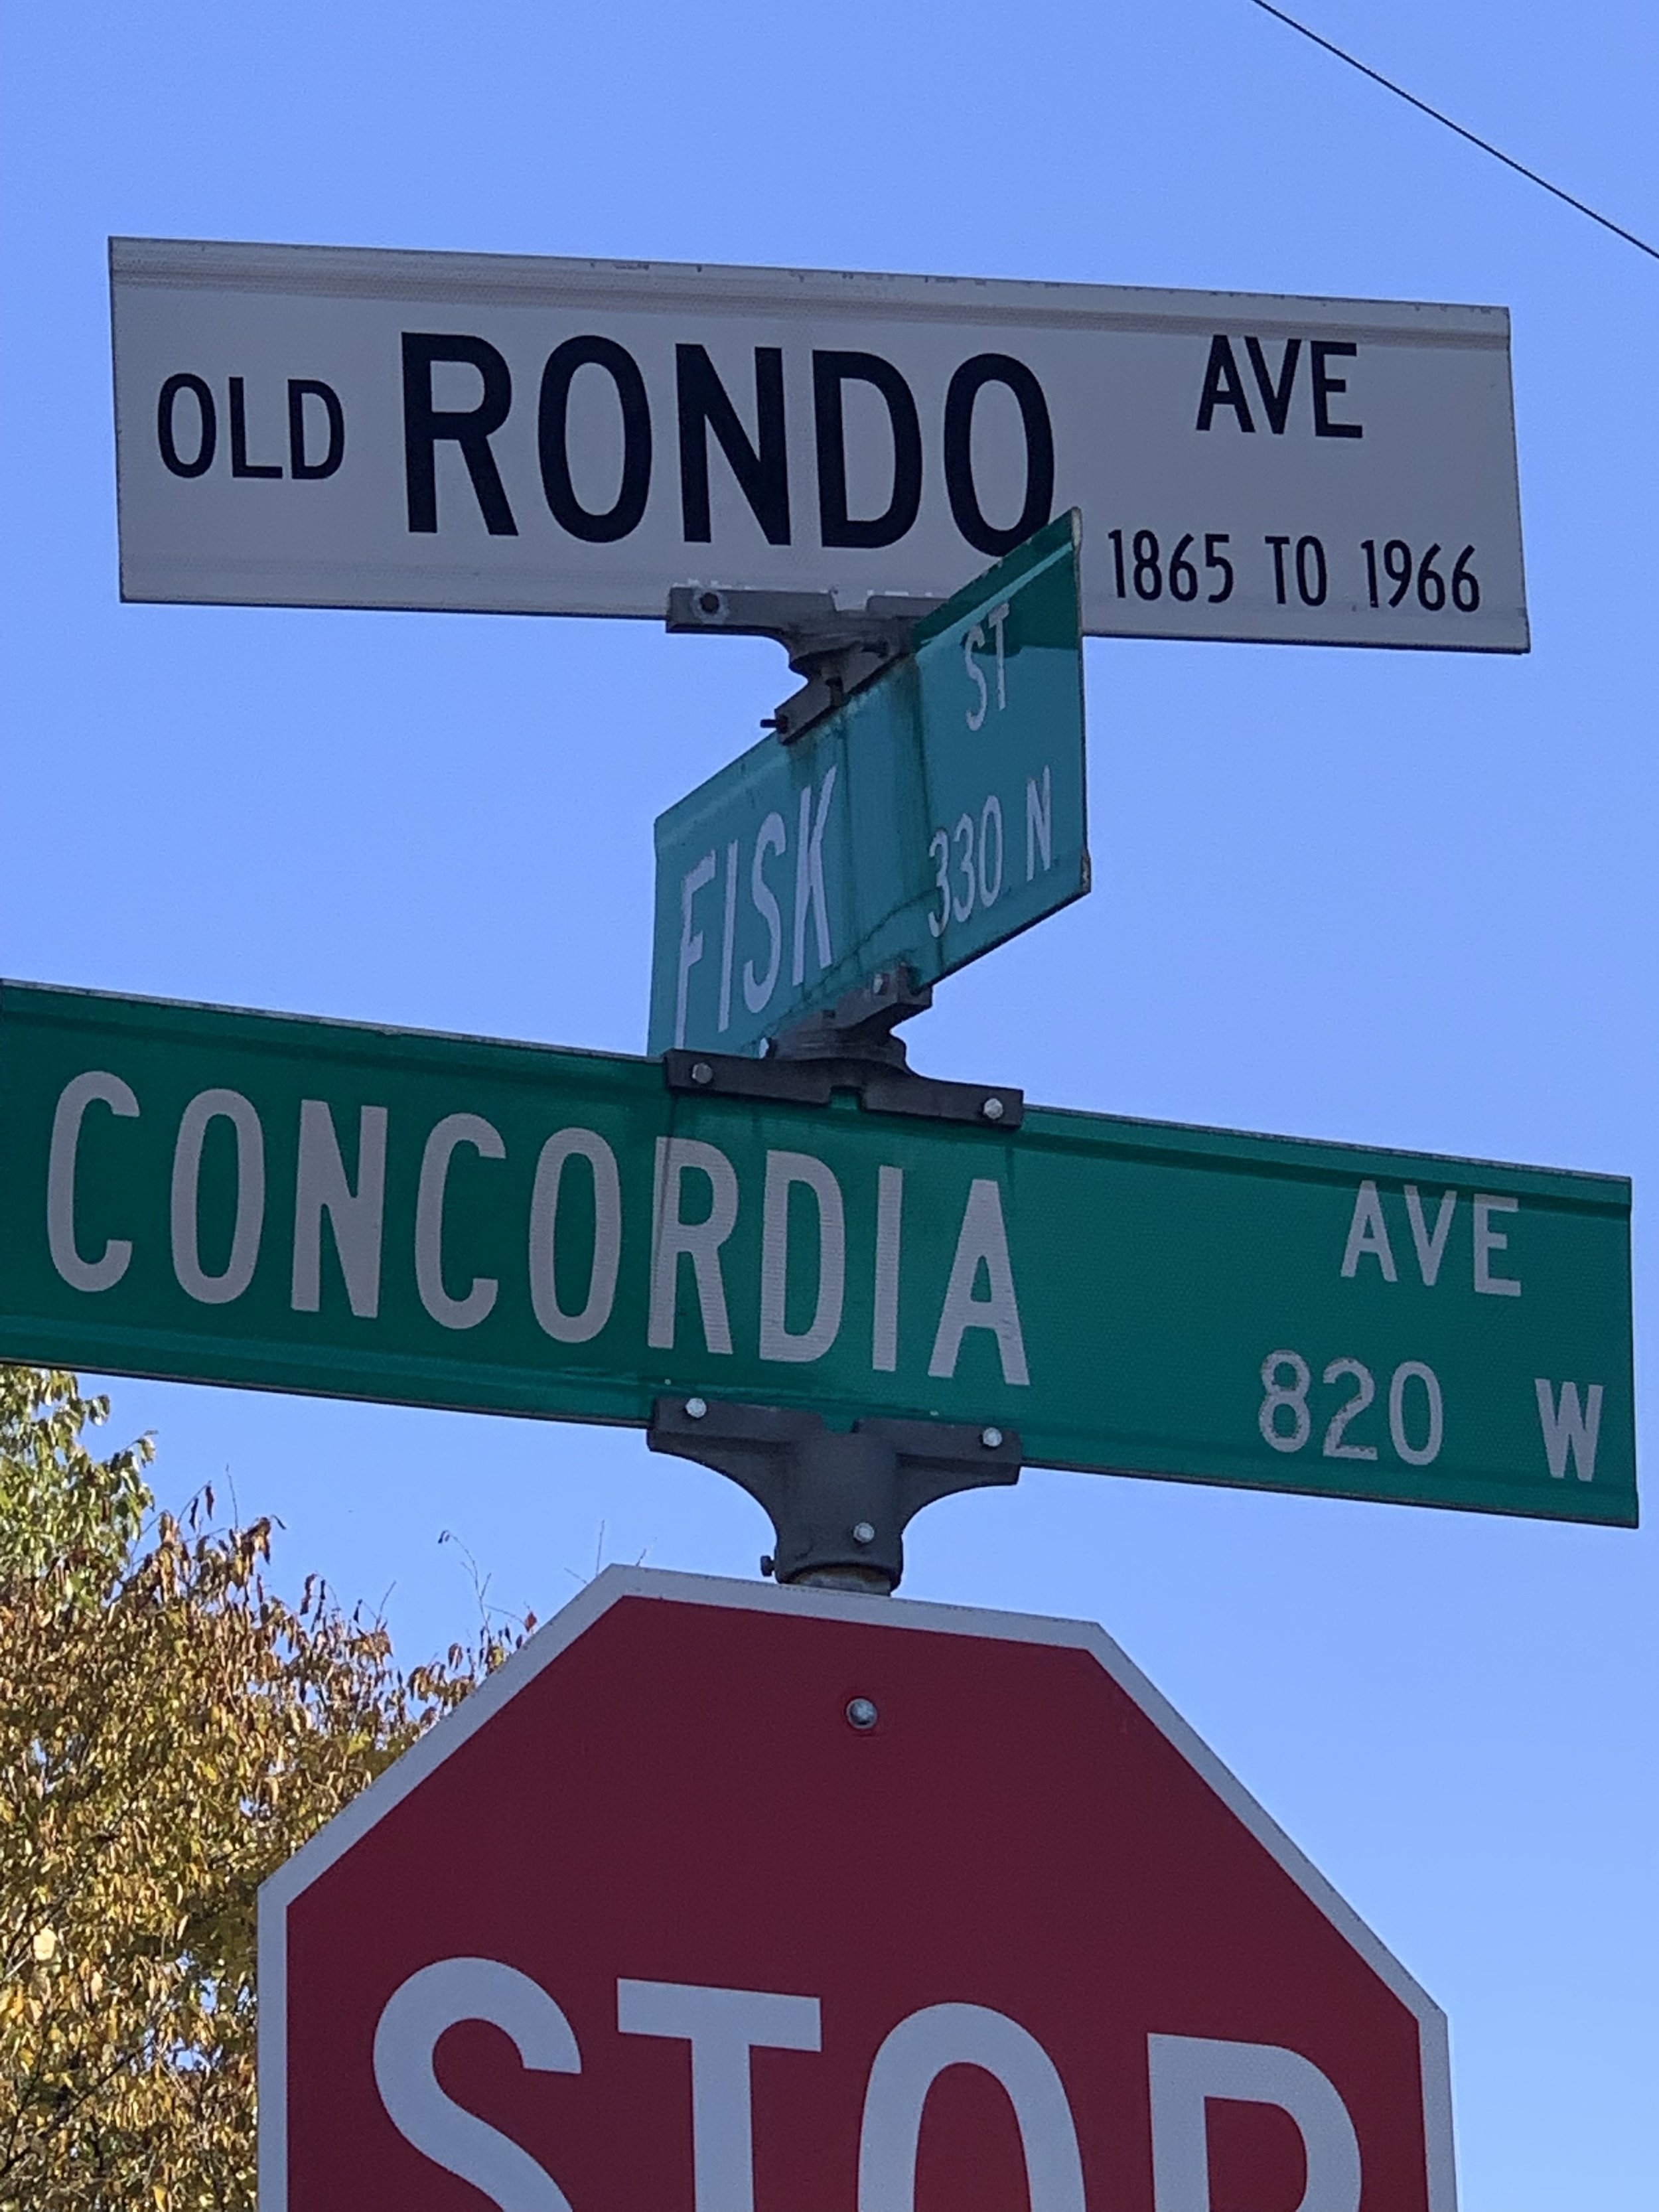 Rondo Sign with Fisk and Concordia and Stop blue skies.jpg